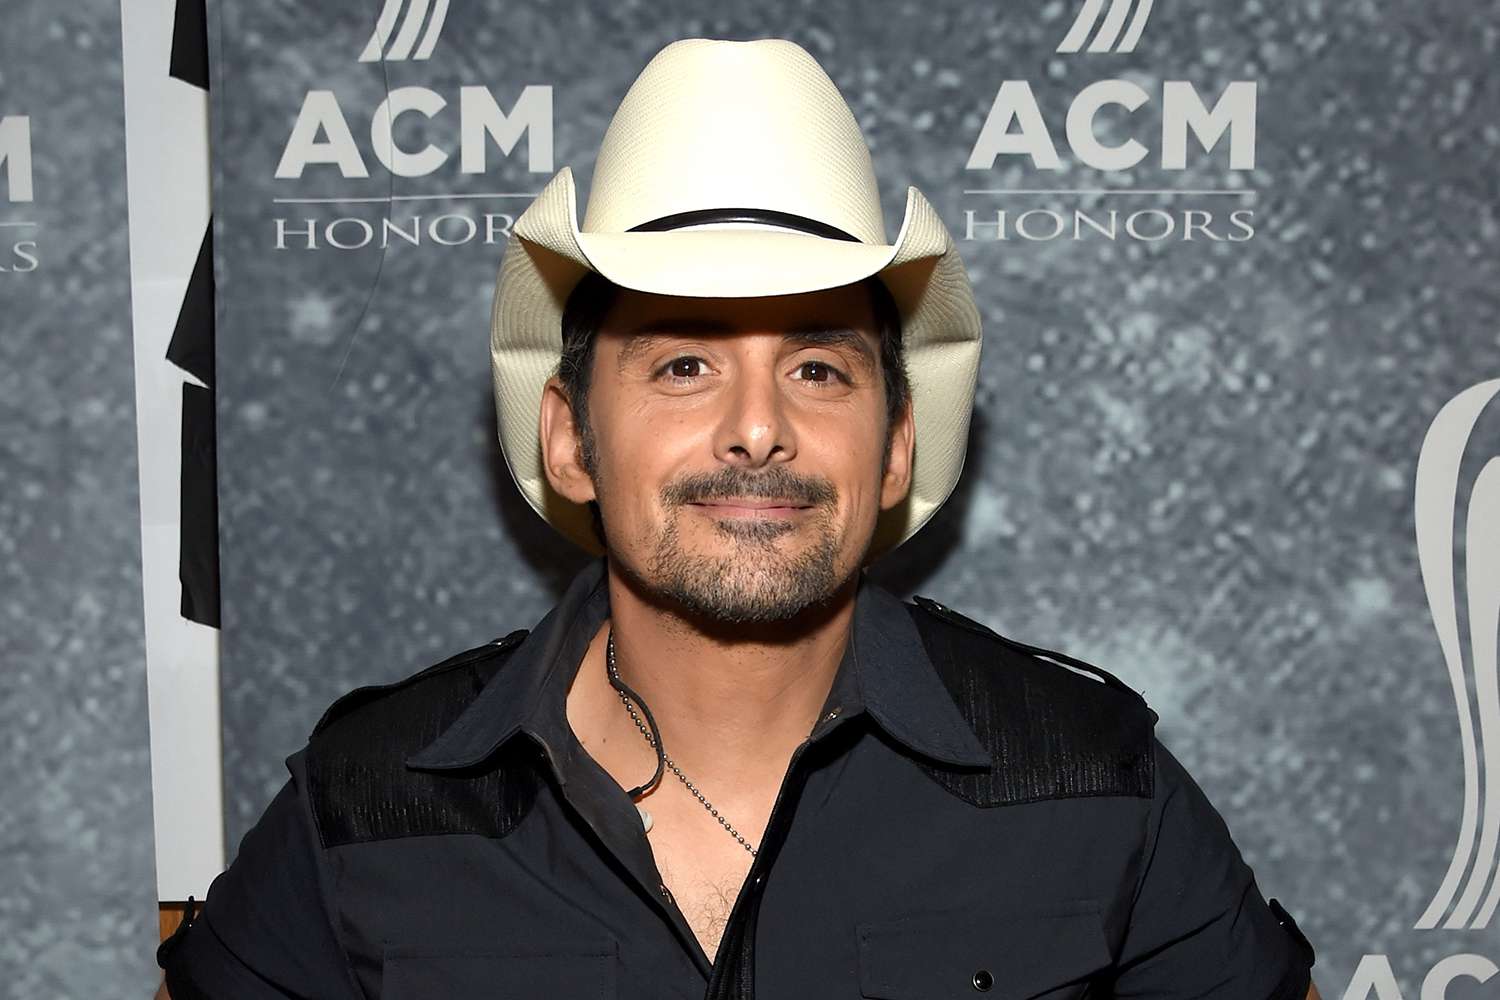 Brad Paisley Shares He Performed Surgery on His Son's Fish | PEOPLE.com